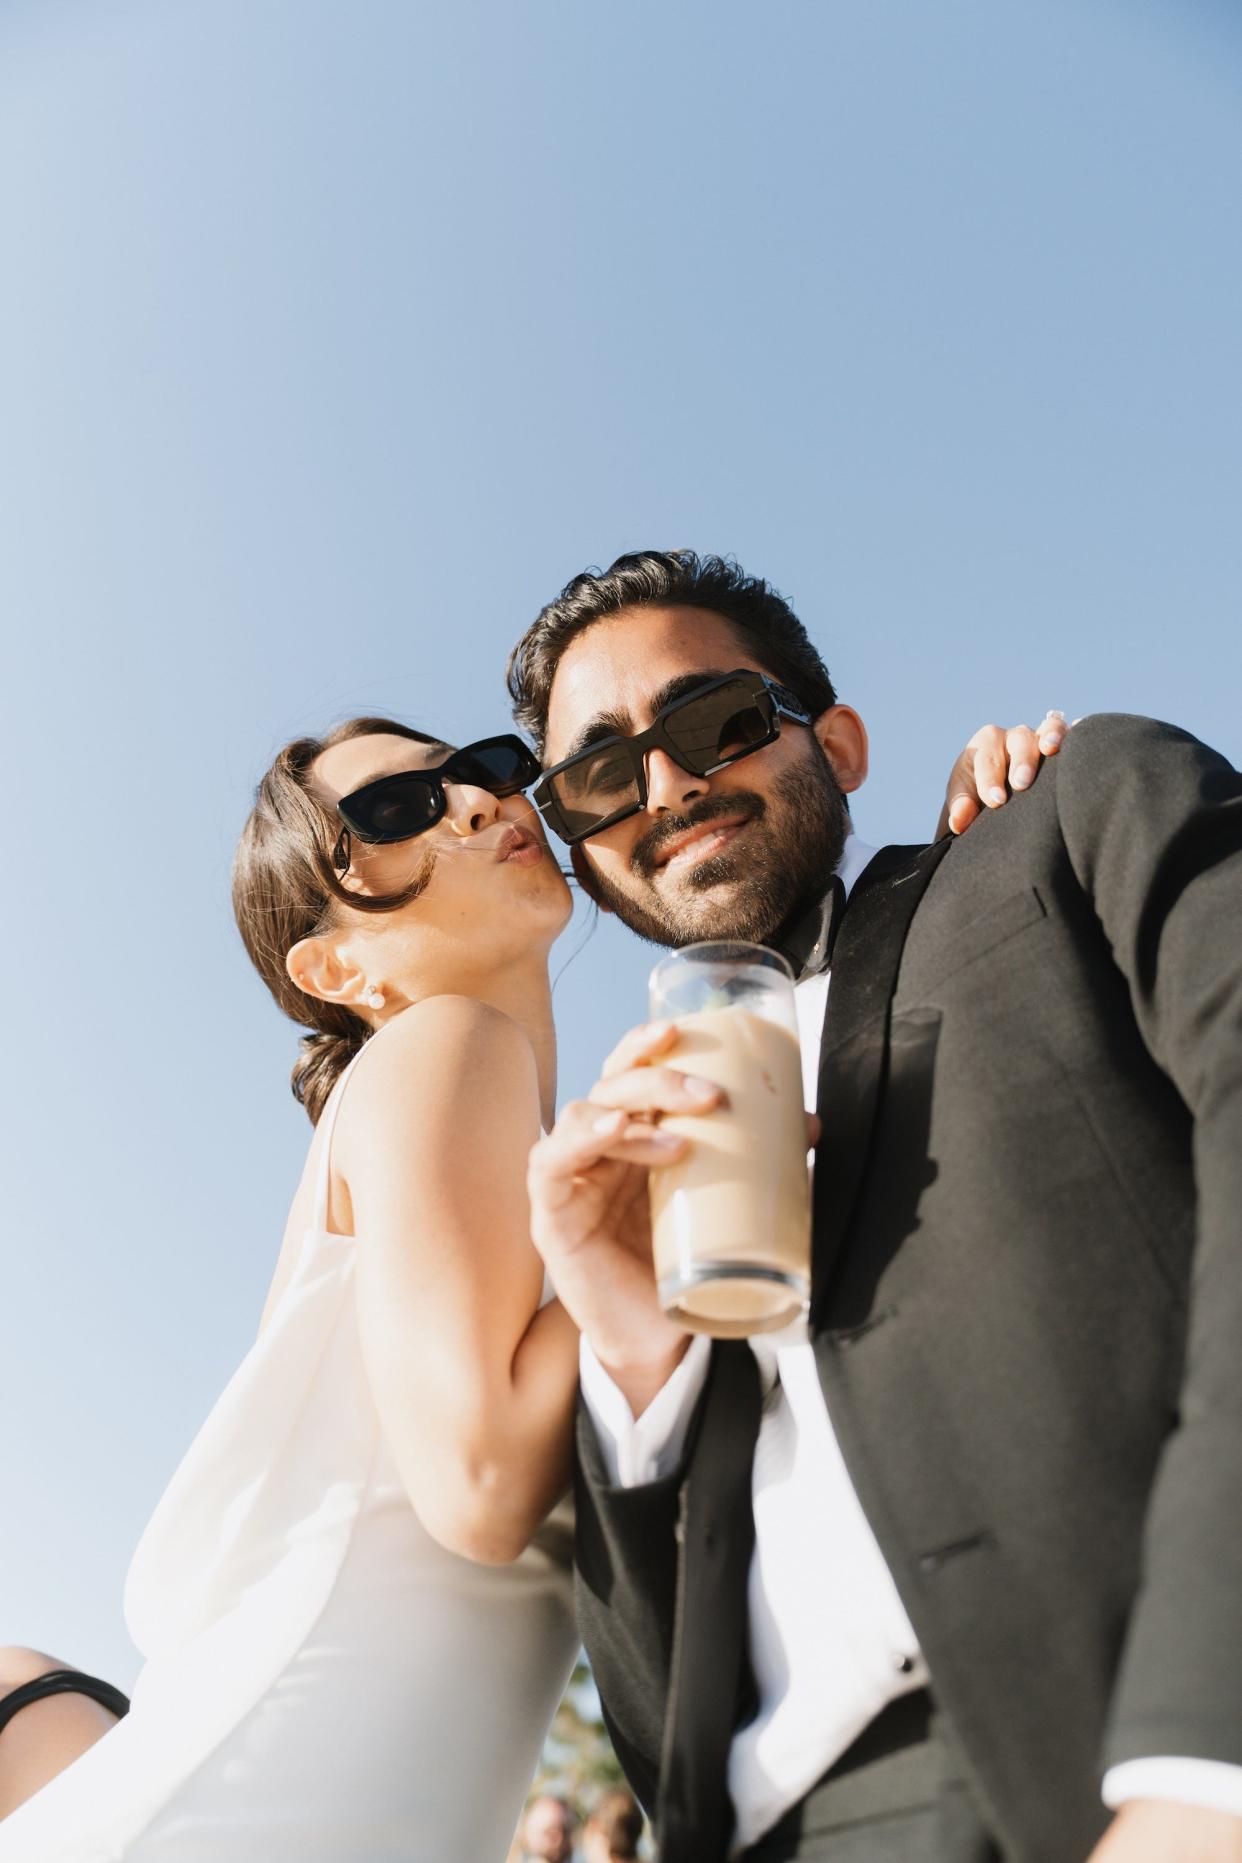 A bride and groom embrace wearing sunglasses.